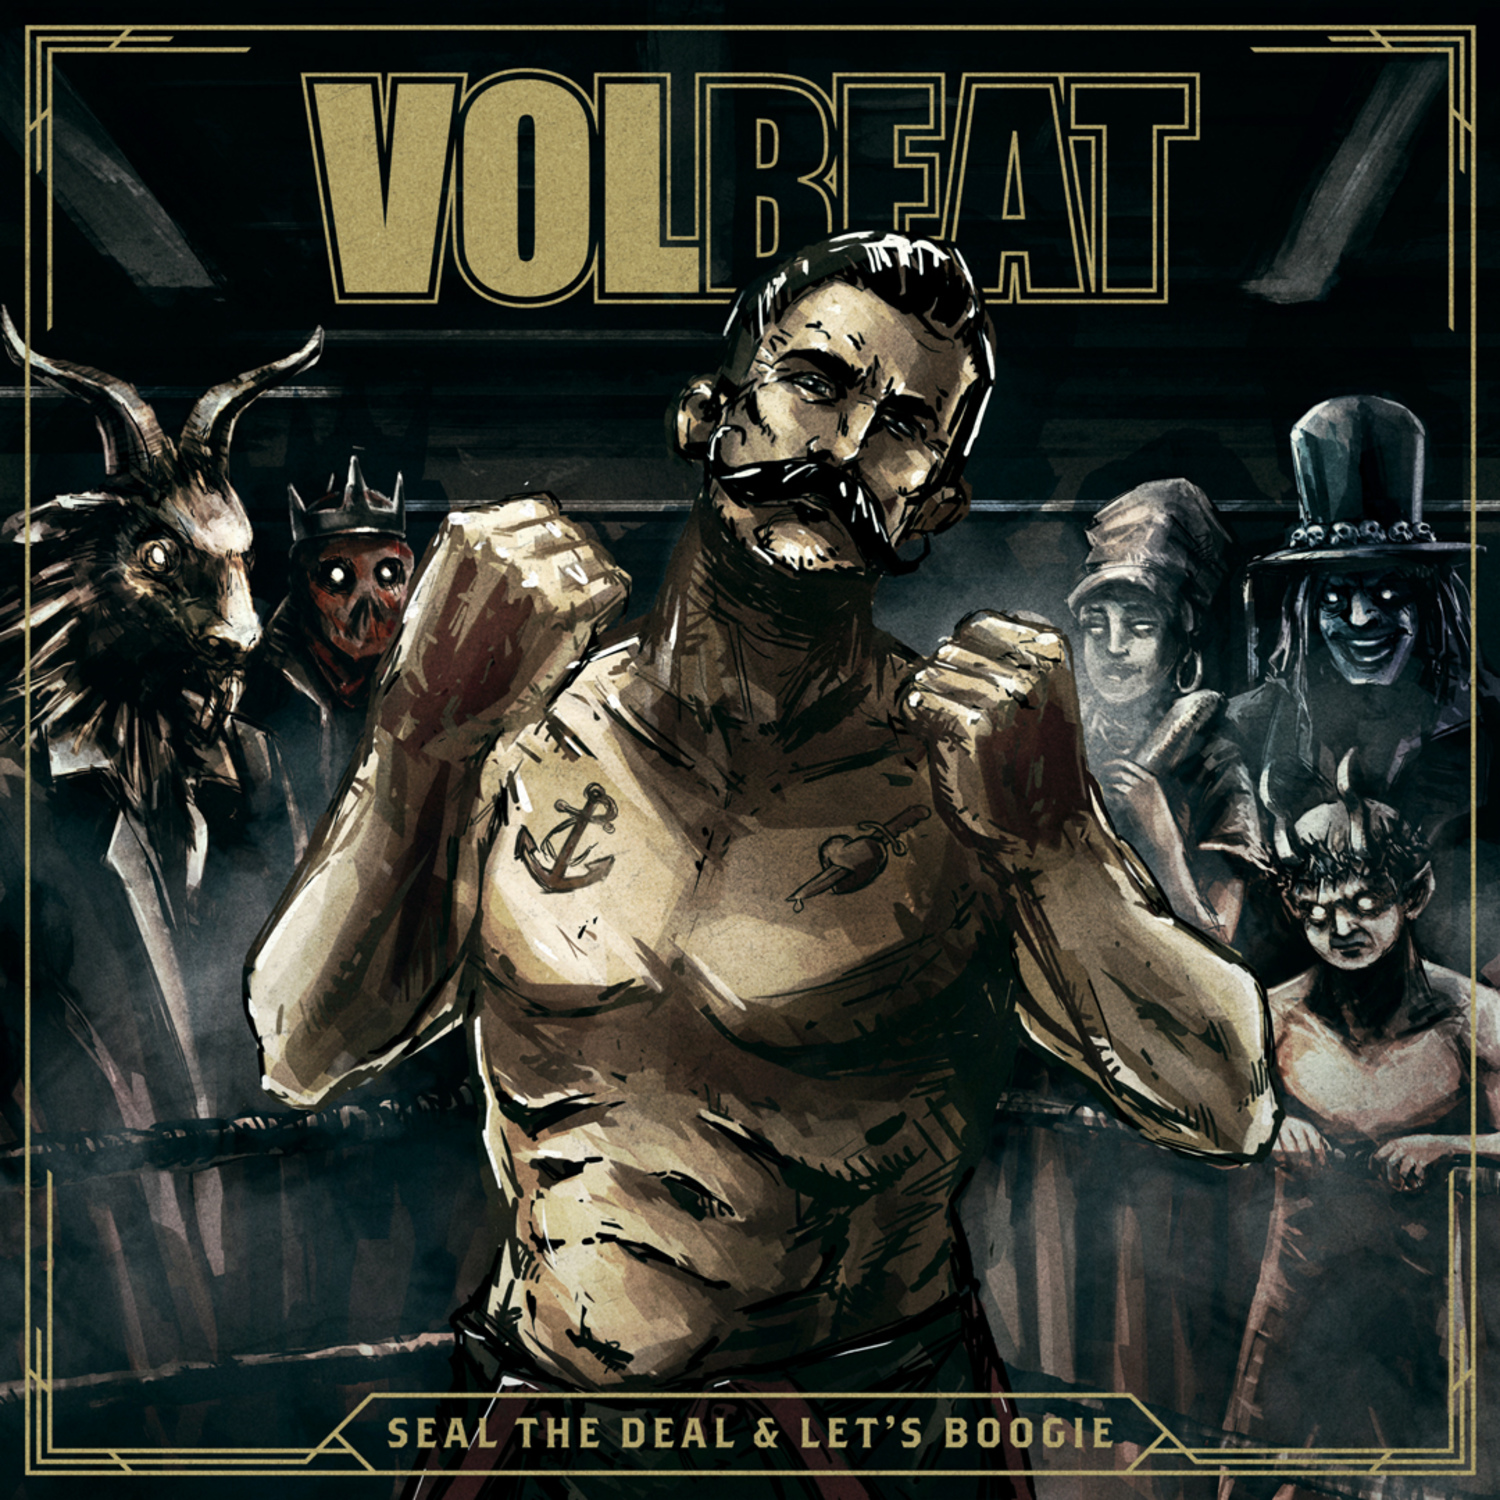 volbeat_seal_the_deal_let_s_boogie_2016.jpg